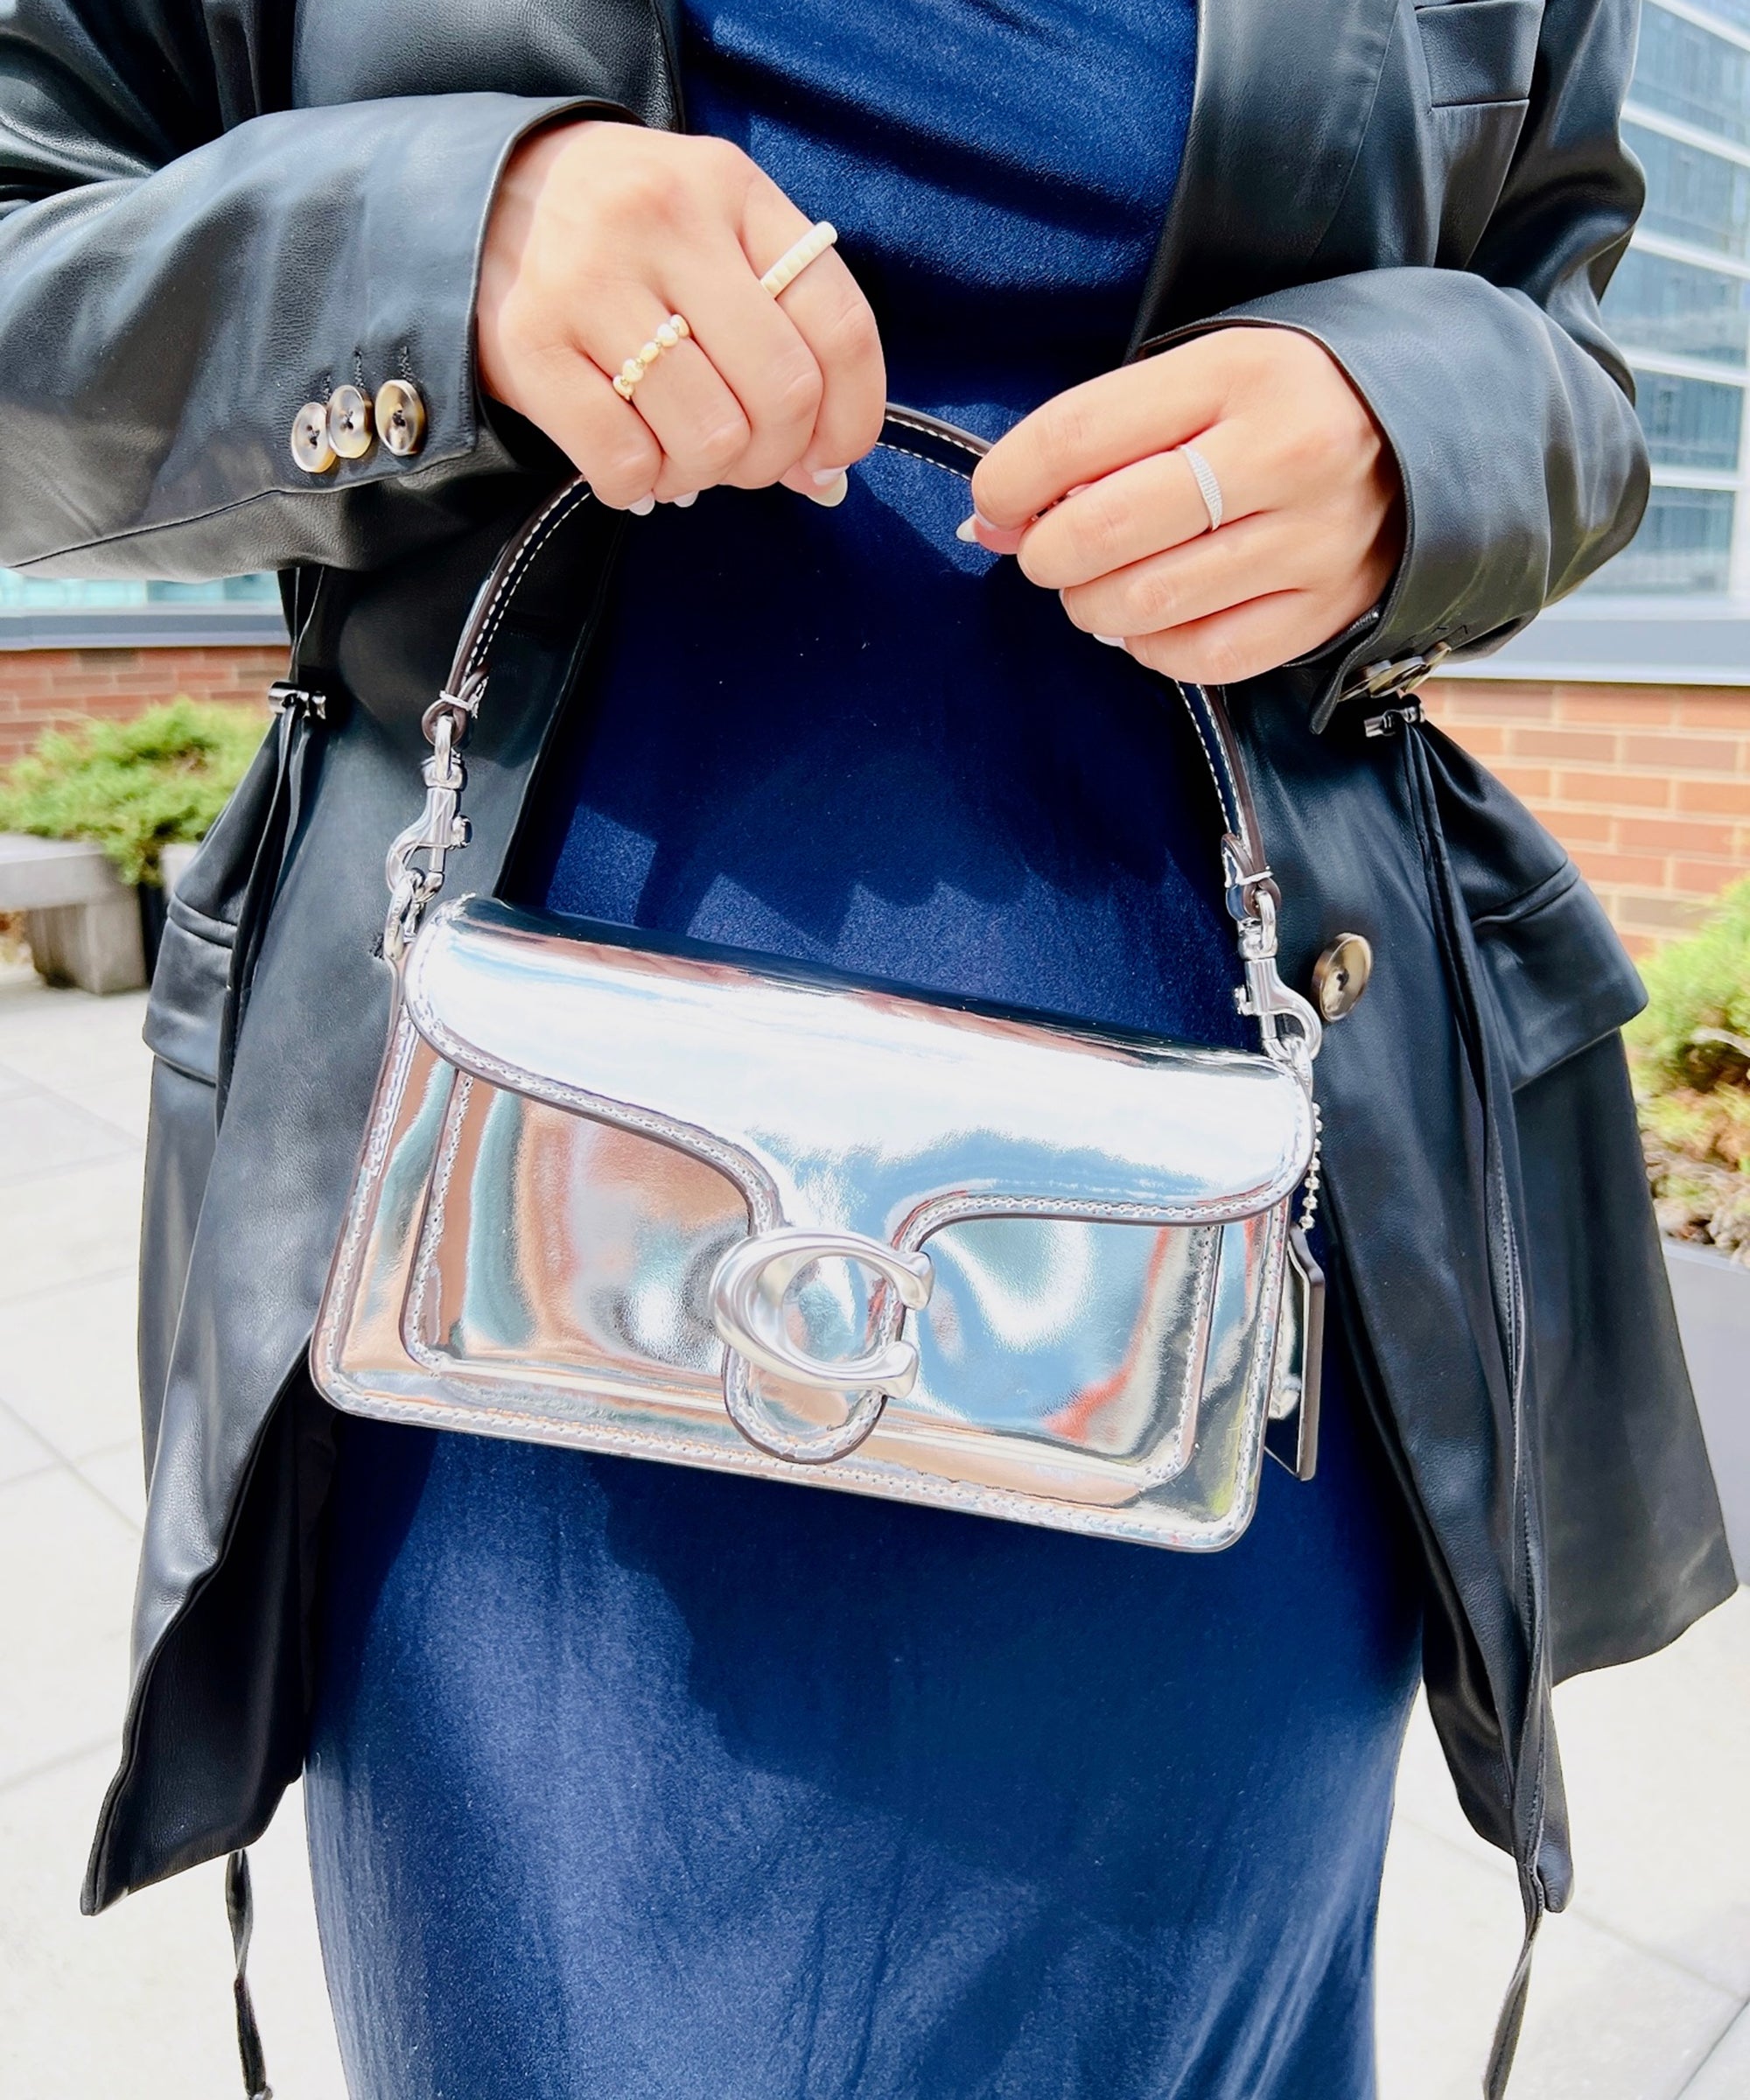 Here's How Coach Bags Turned From Coveted Classics Into Tacky Chaos |  HuffPost Impact